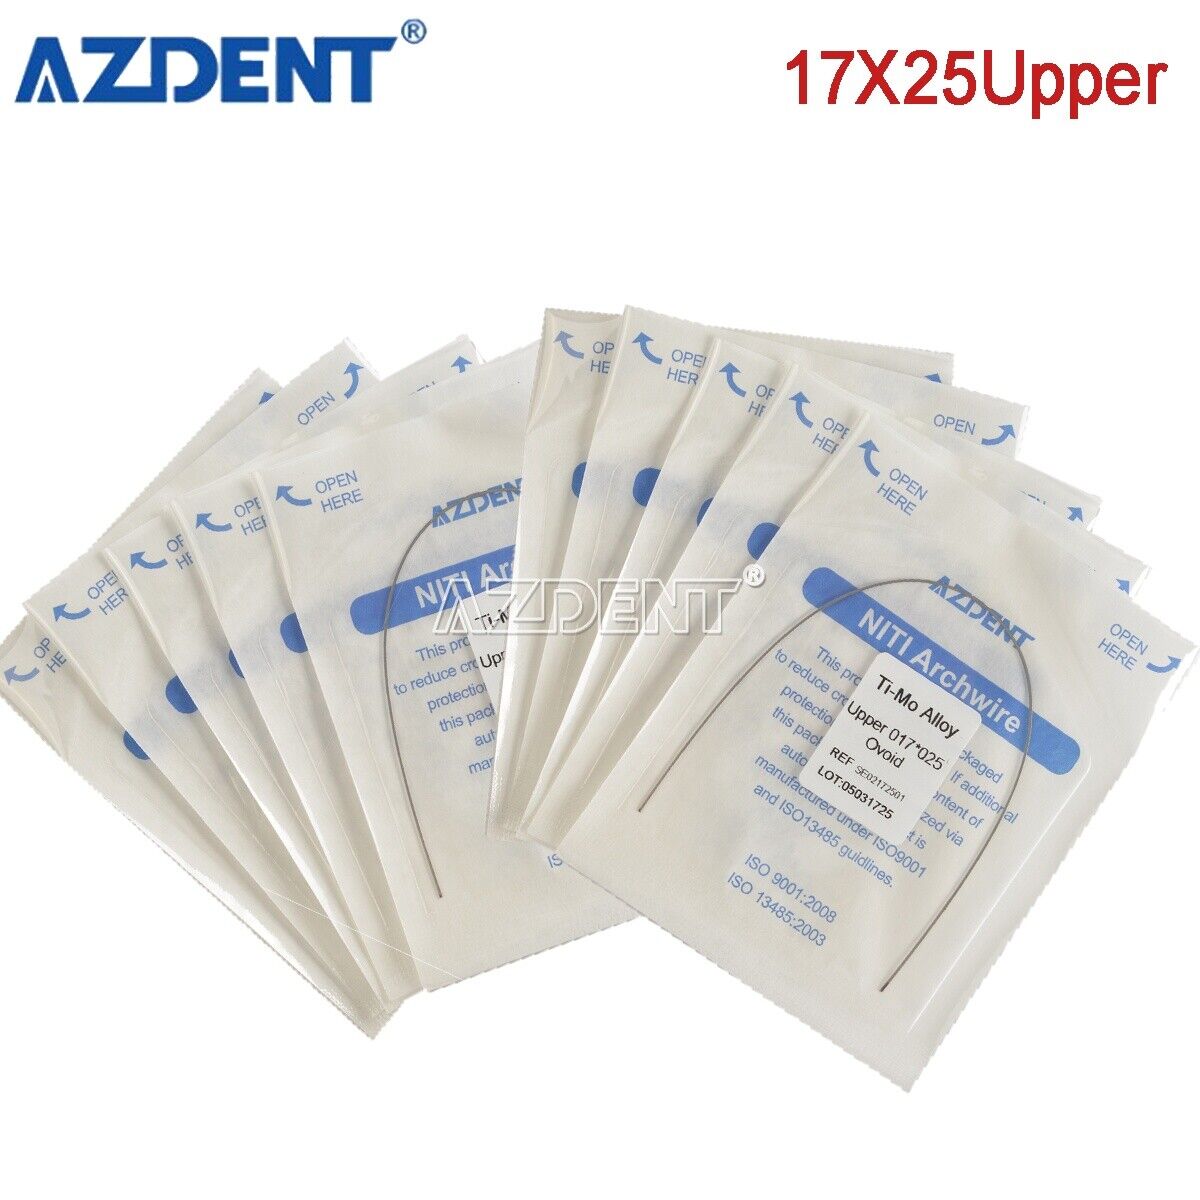 50 Pack AZDENT Dental Orthodontic TMA Arch Wires Molybdenum Alloy 17X25 Upper